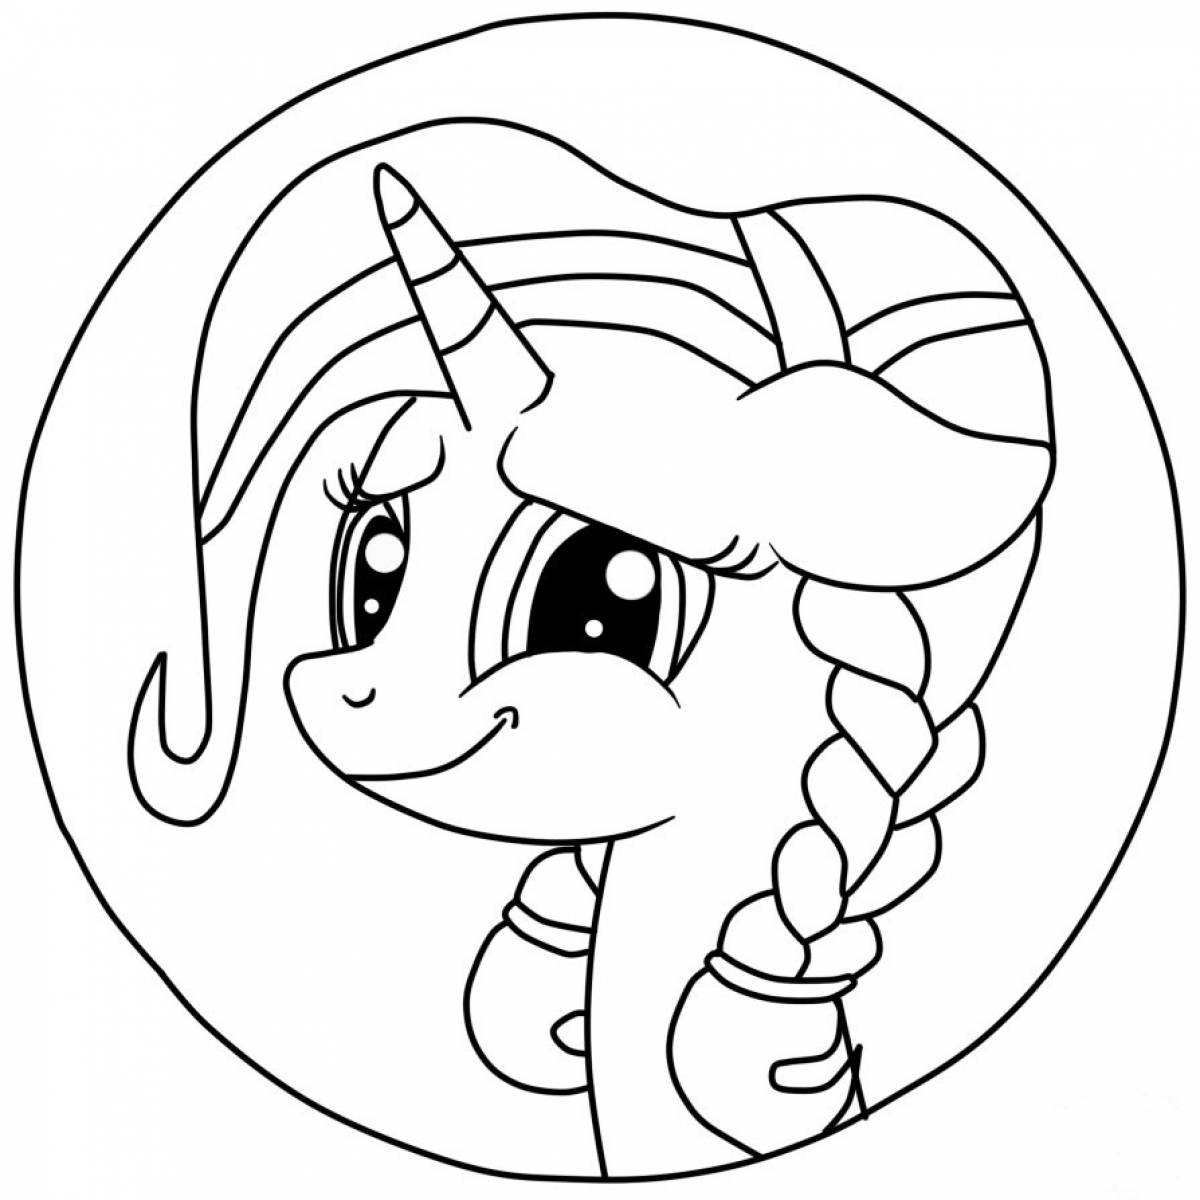 Ponyville coloring pages to print